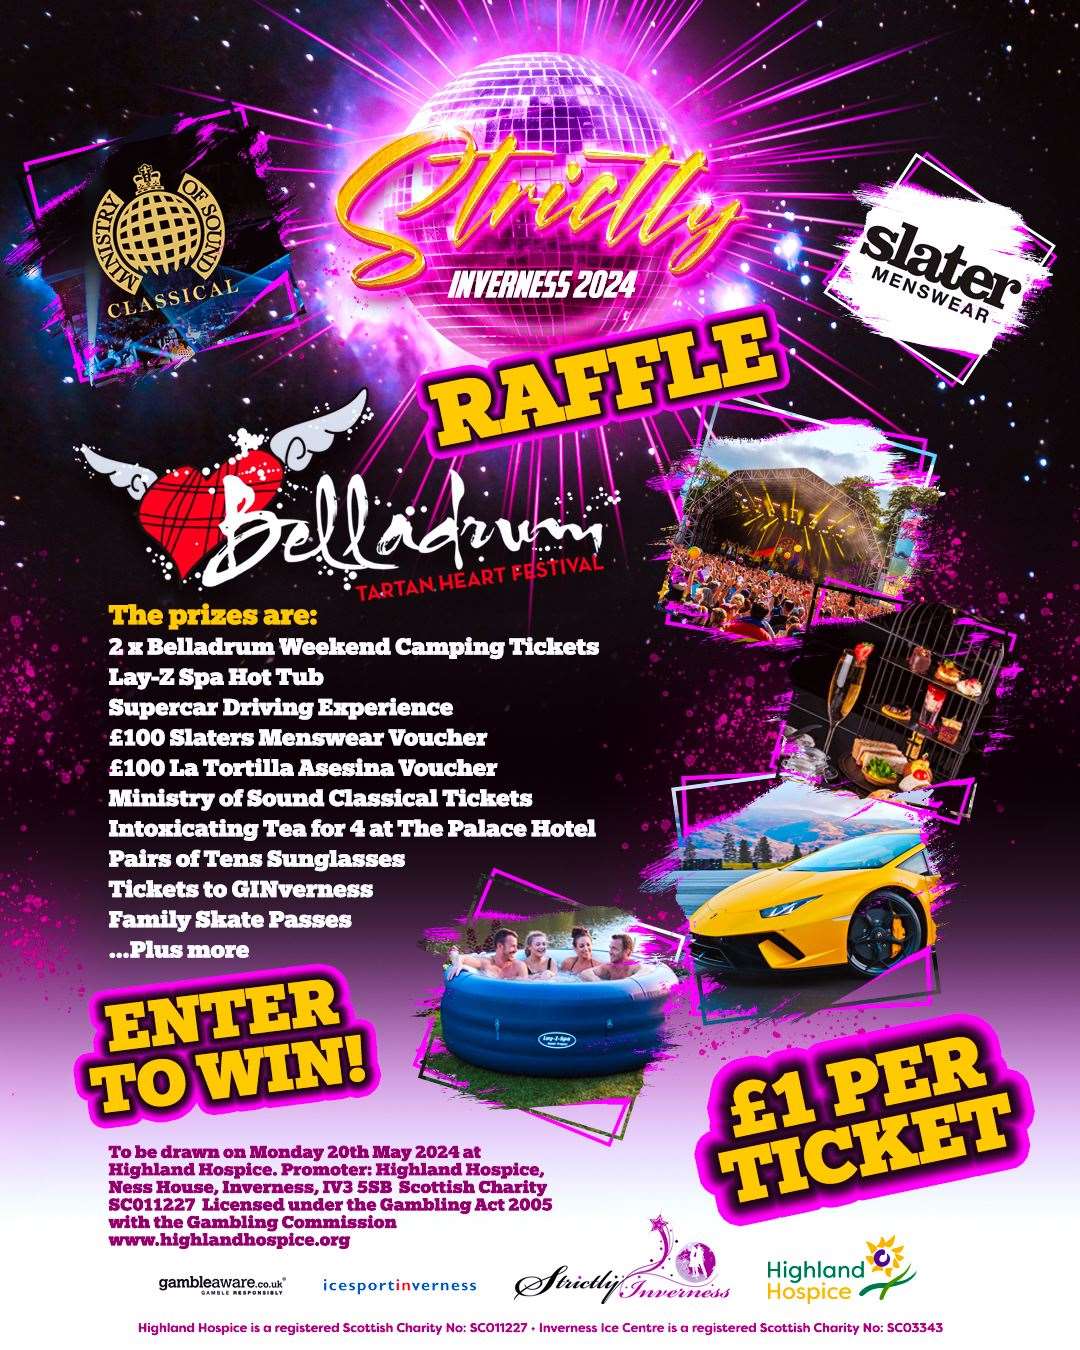 The Strictly Raffle has some awesome prizes to be won.